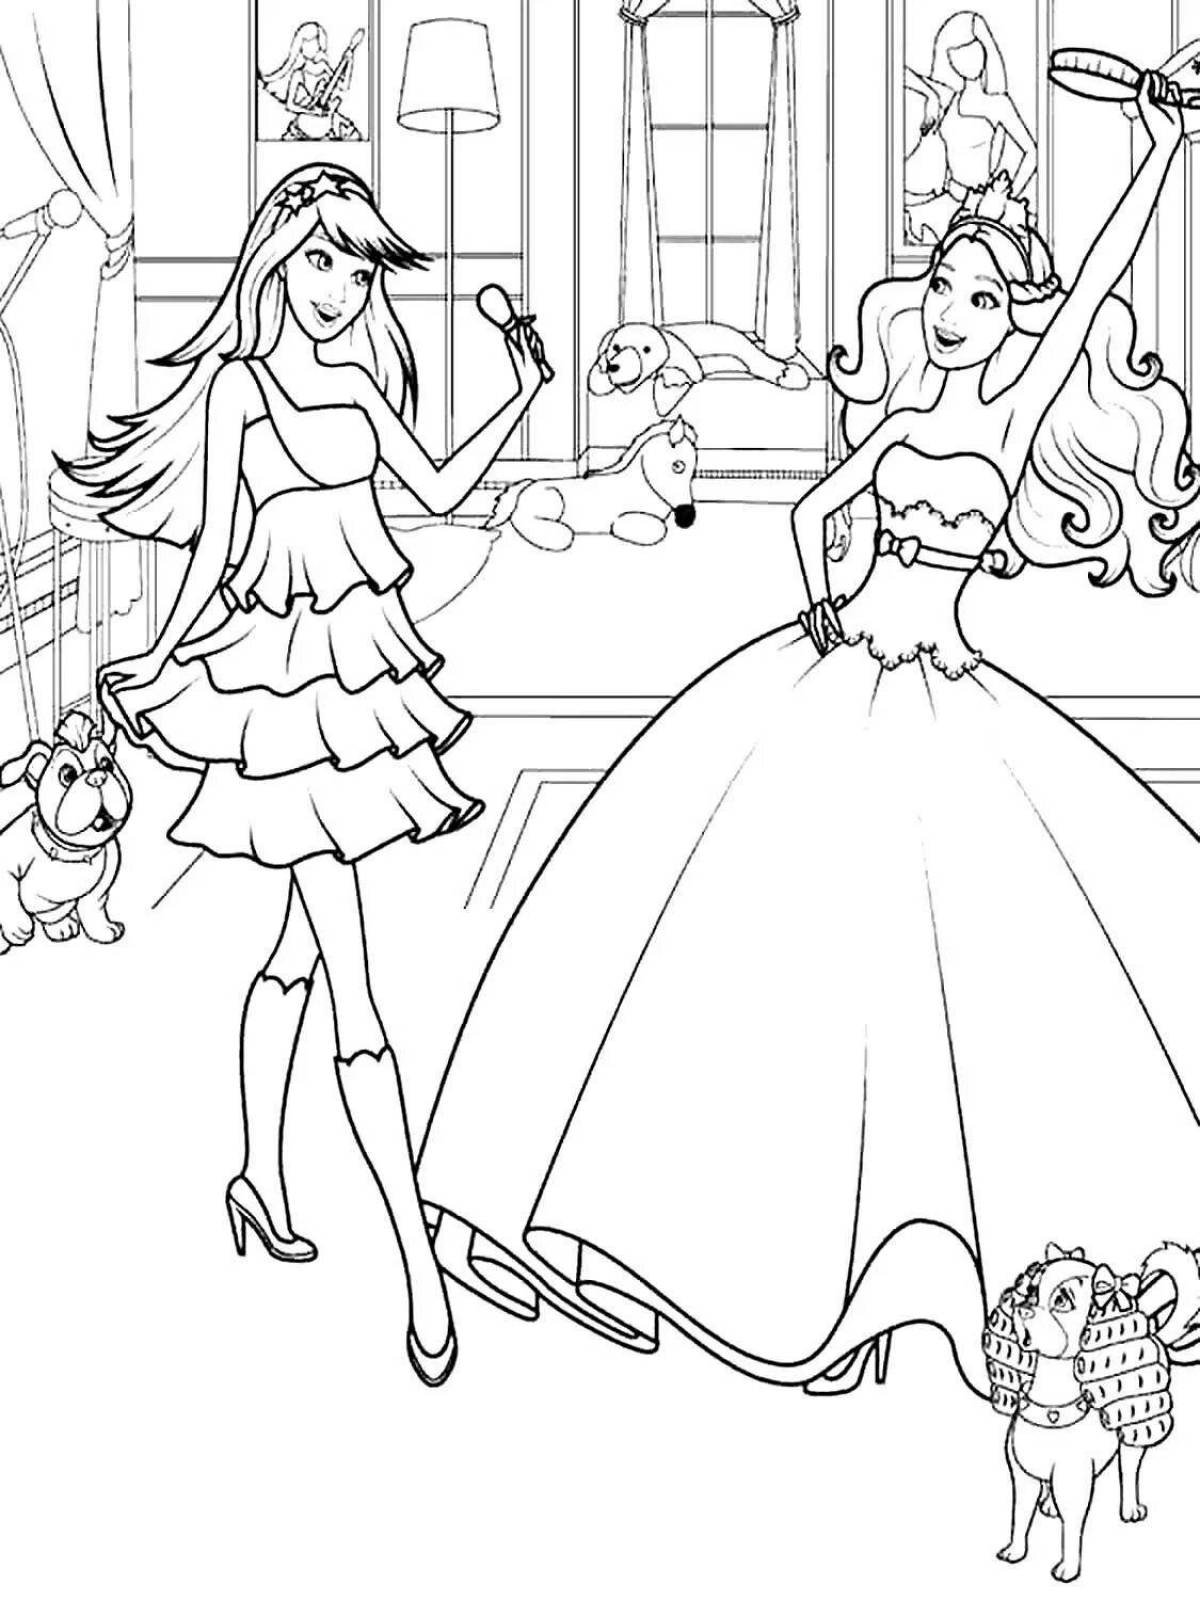 Exquisite coloring games for girls barbie and princess